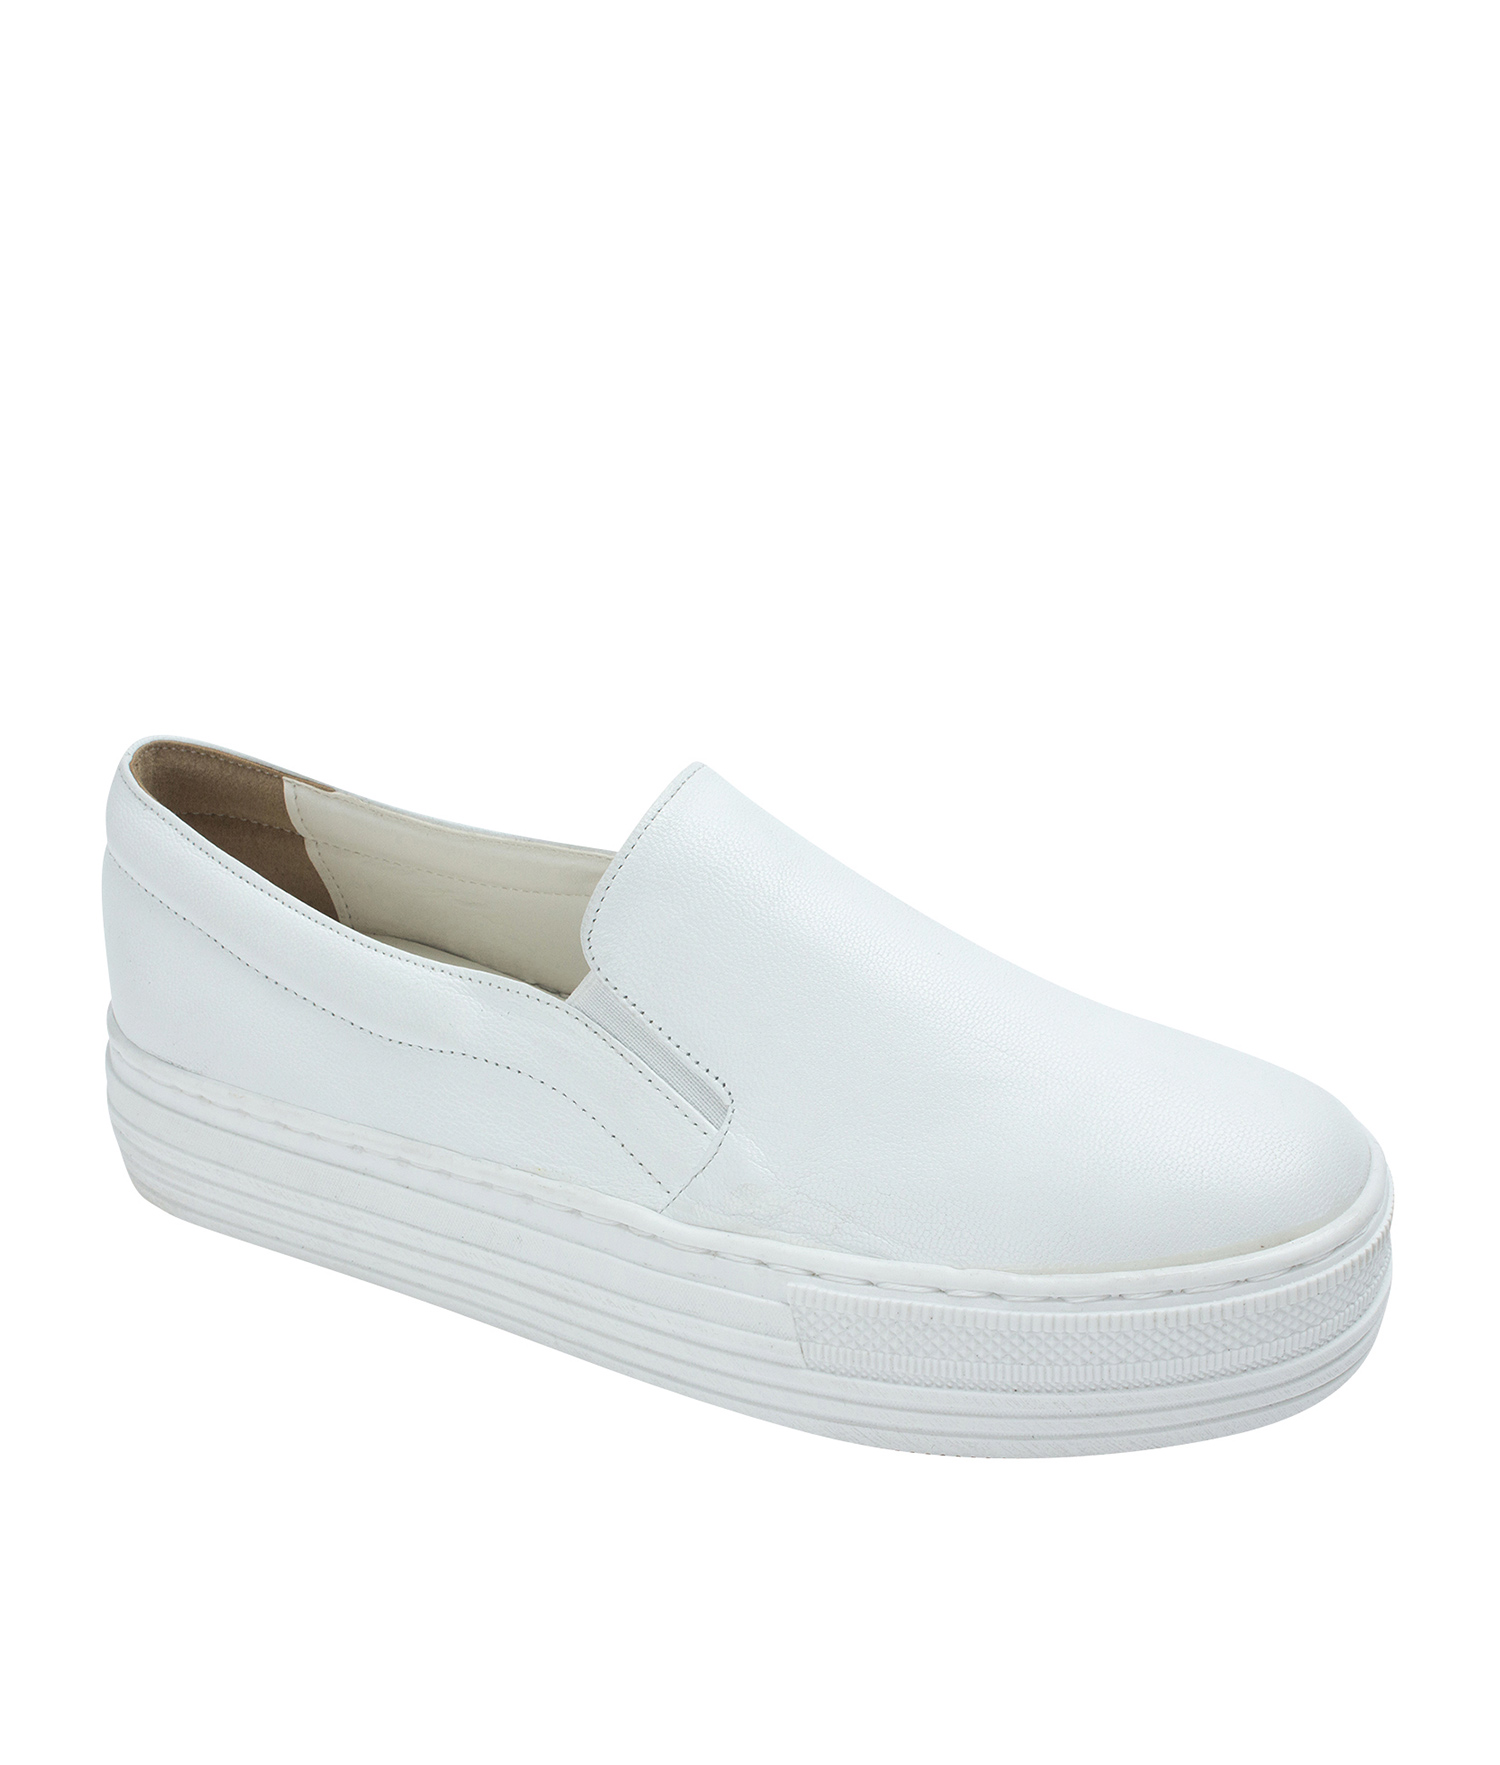 white leather slip on shoes womens